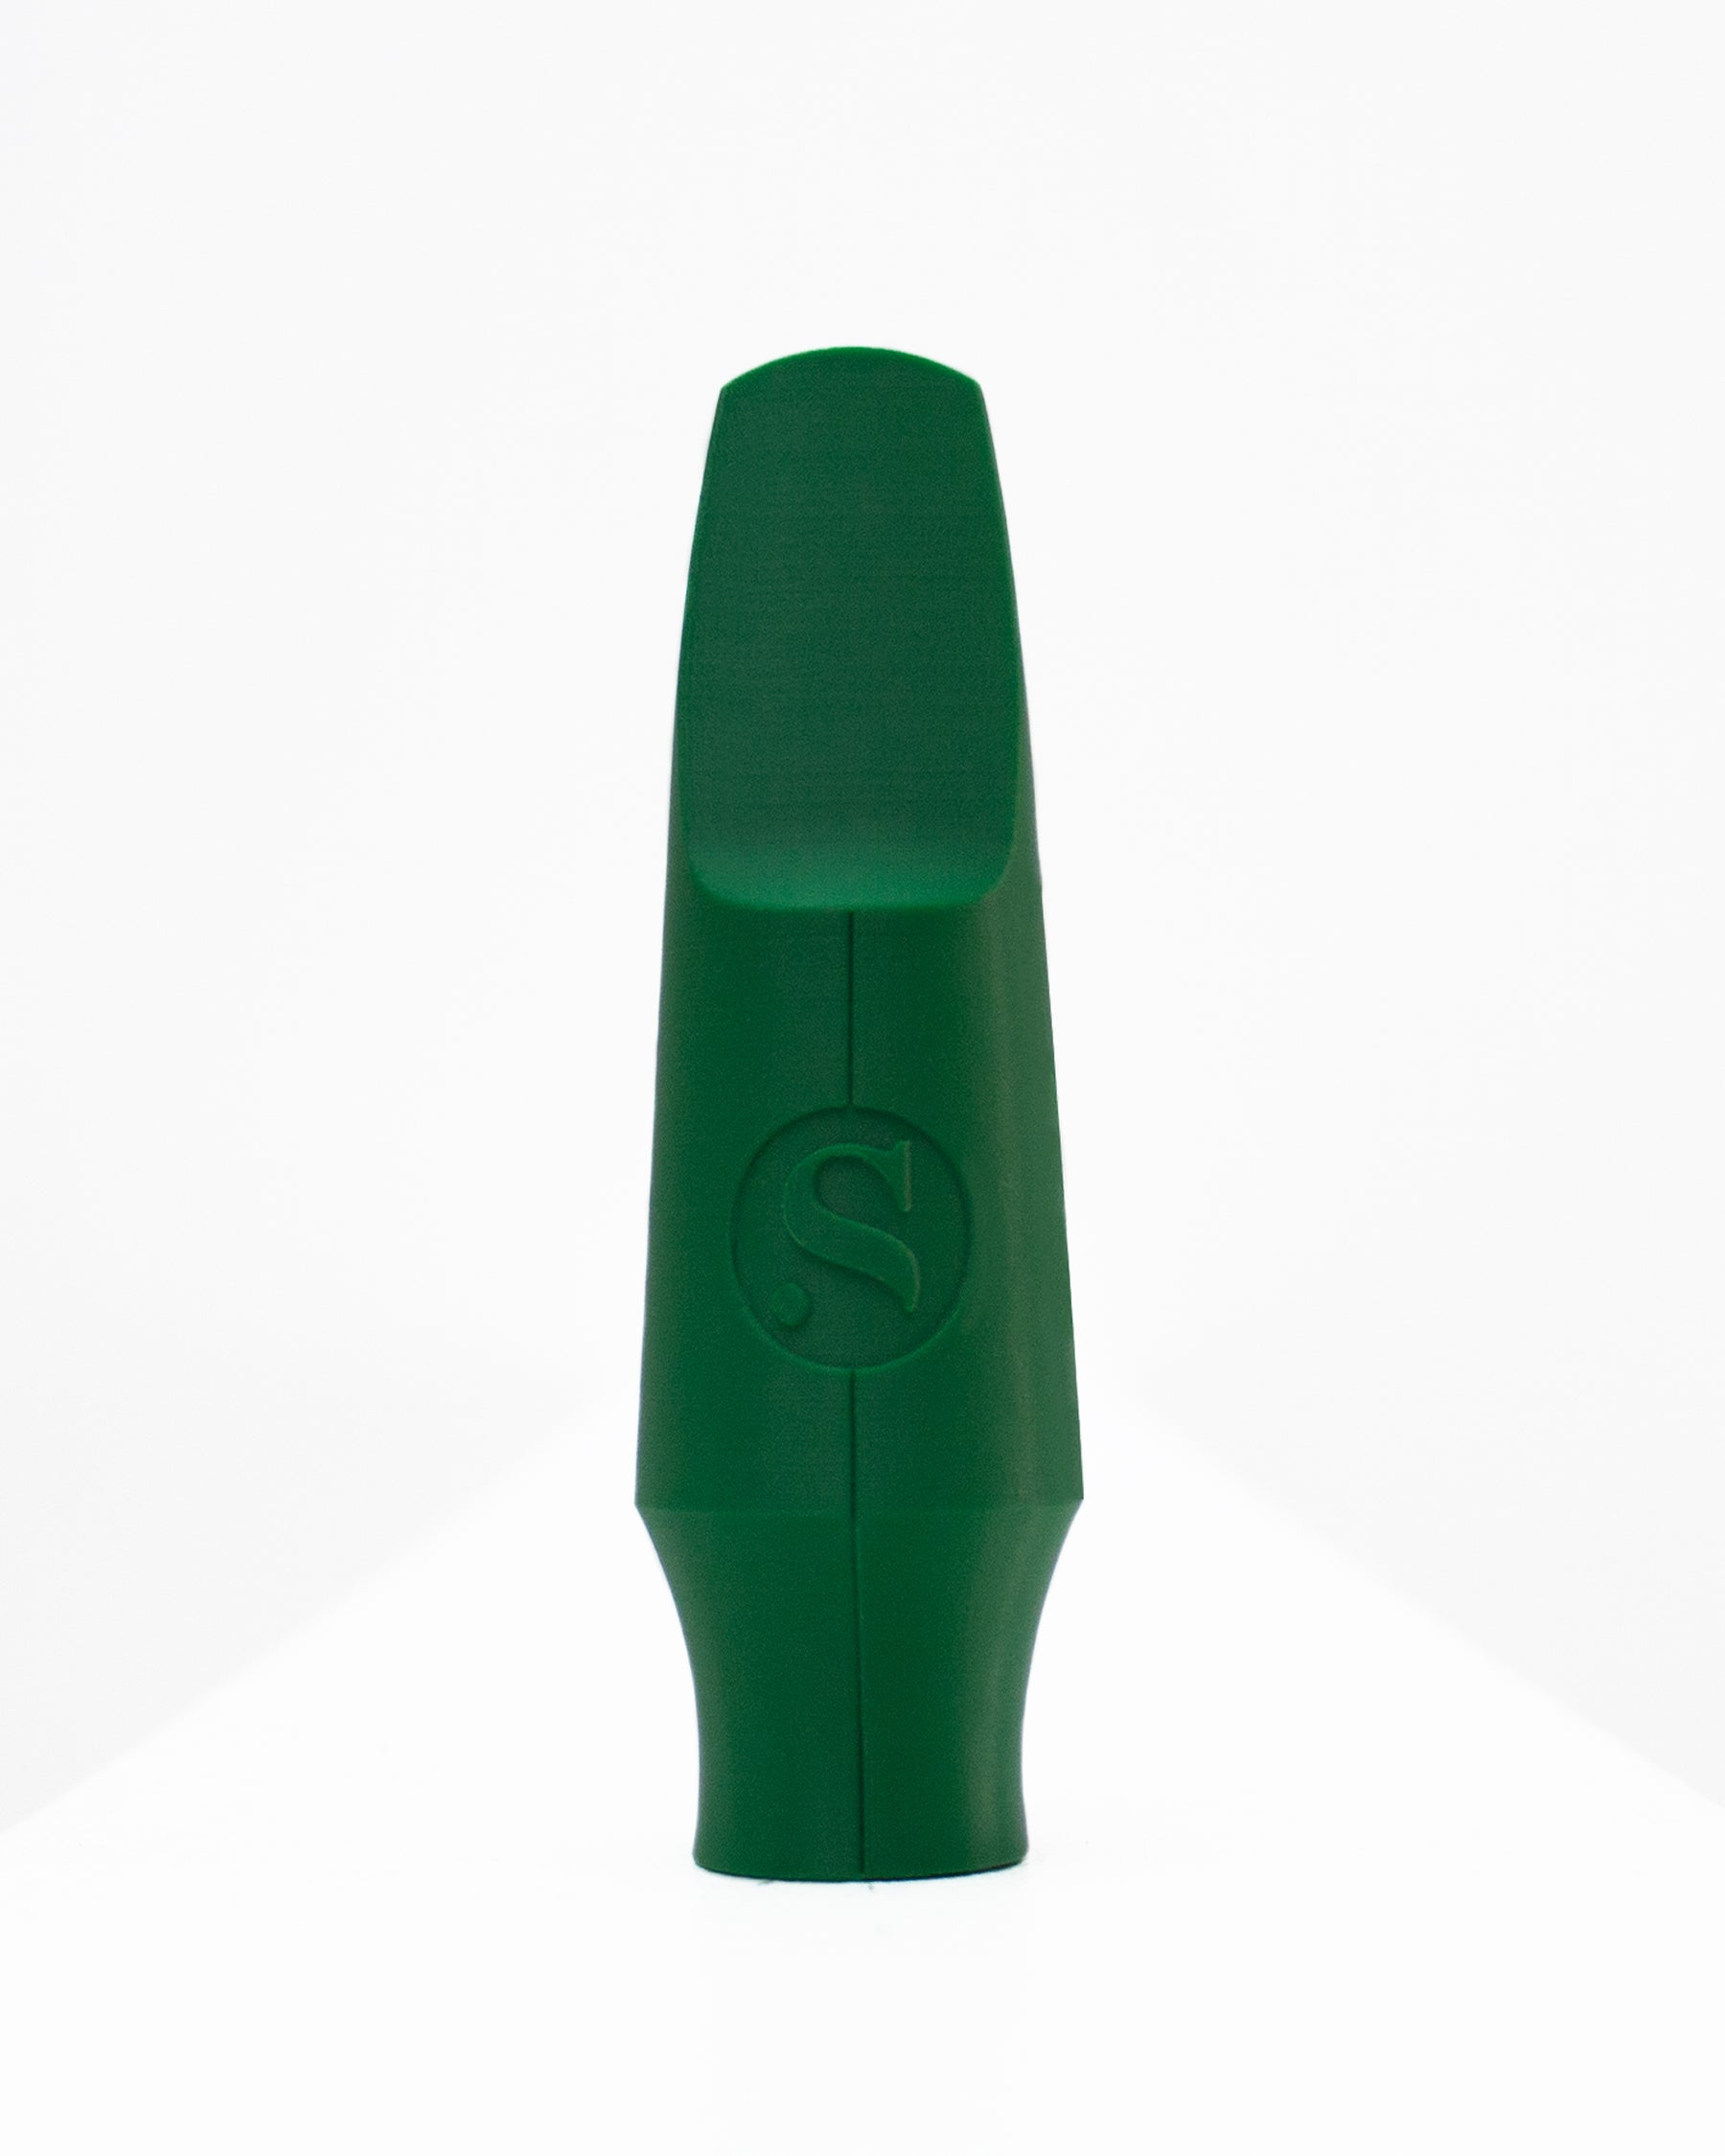 Tenor Signature Saxophone mouthpiece - Michael Wilbur by Syos - 9 / Forest Green